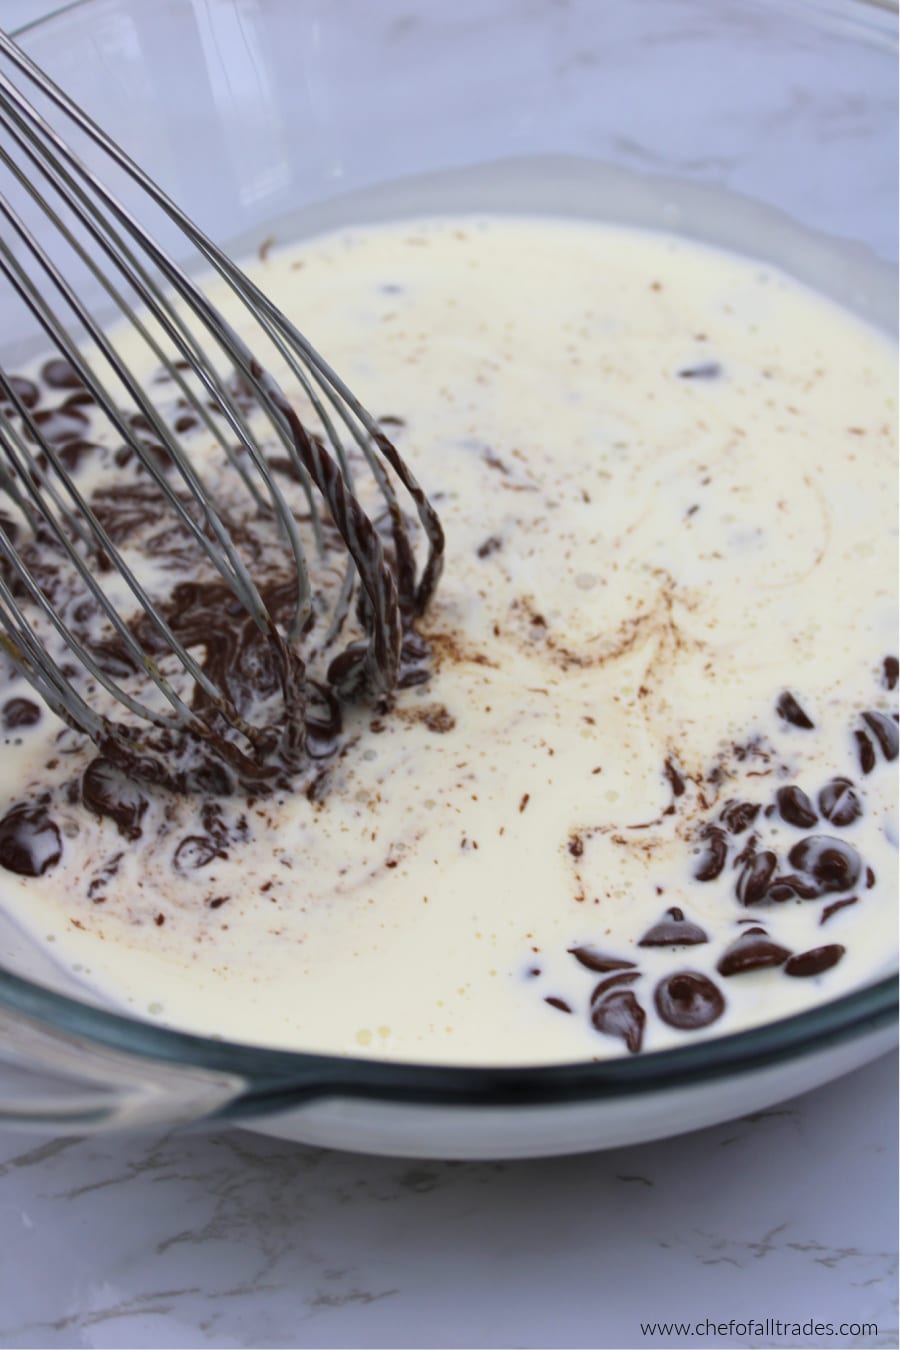 heavy cream and chocolate chips being whisked together in a glass bowl